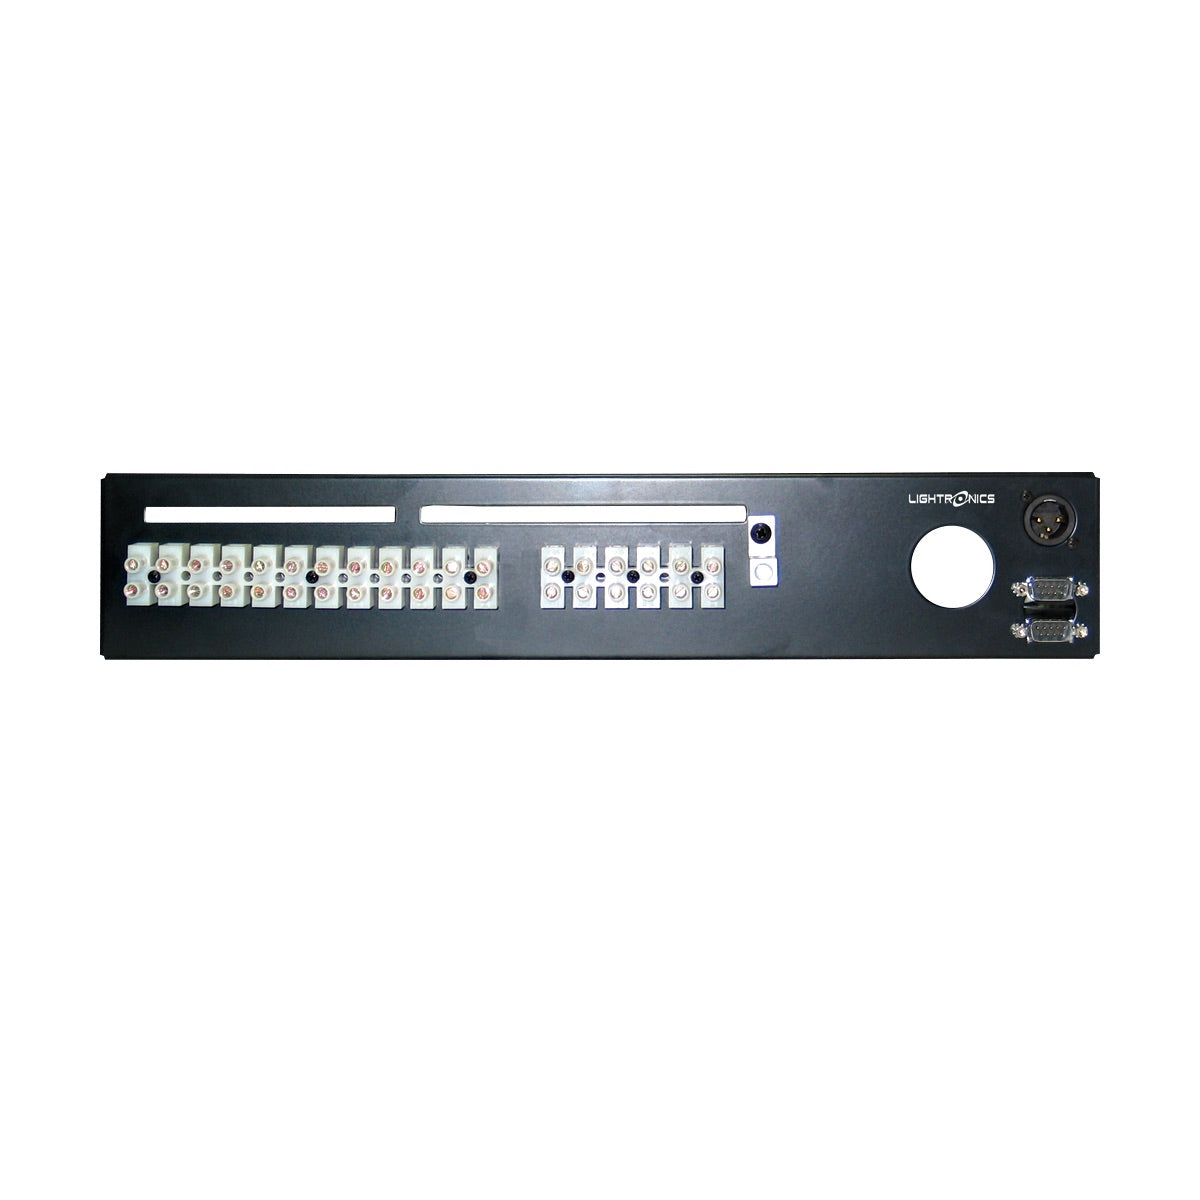 Lightronics RD82 Rack Mount Dimmer, RD Series, rear Terminal/Barrier Connector Strip with Knockout Cover